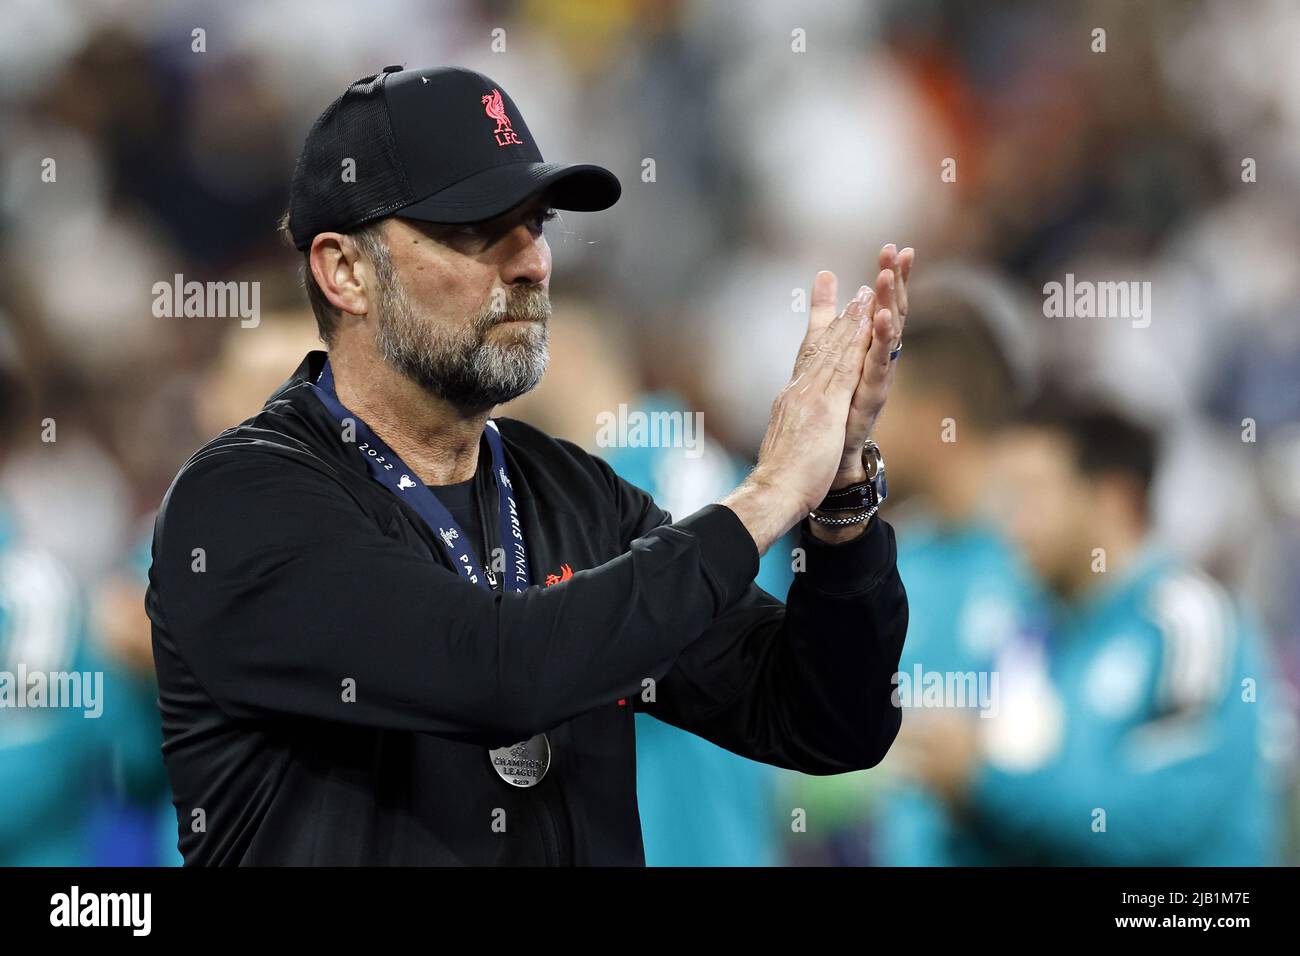 PARIS - Liverpool FC coach Jurgen Klopp during the UEFA Champions League  final match between Liverpool FC and Real Madrid at Stade de Franc on May  28, 2022 in Paris, France. ANP